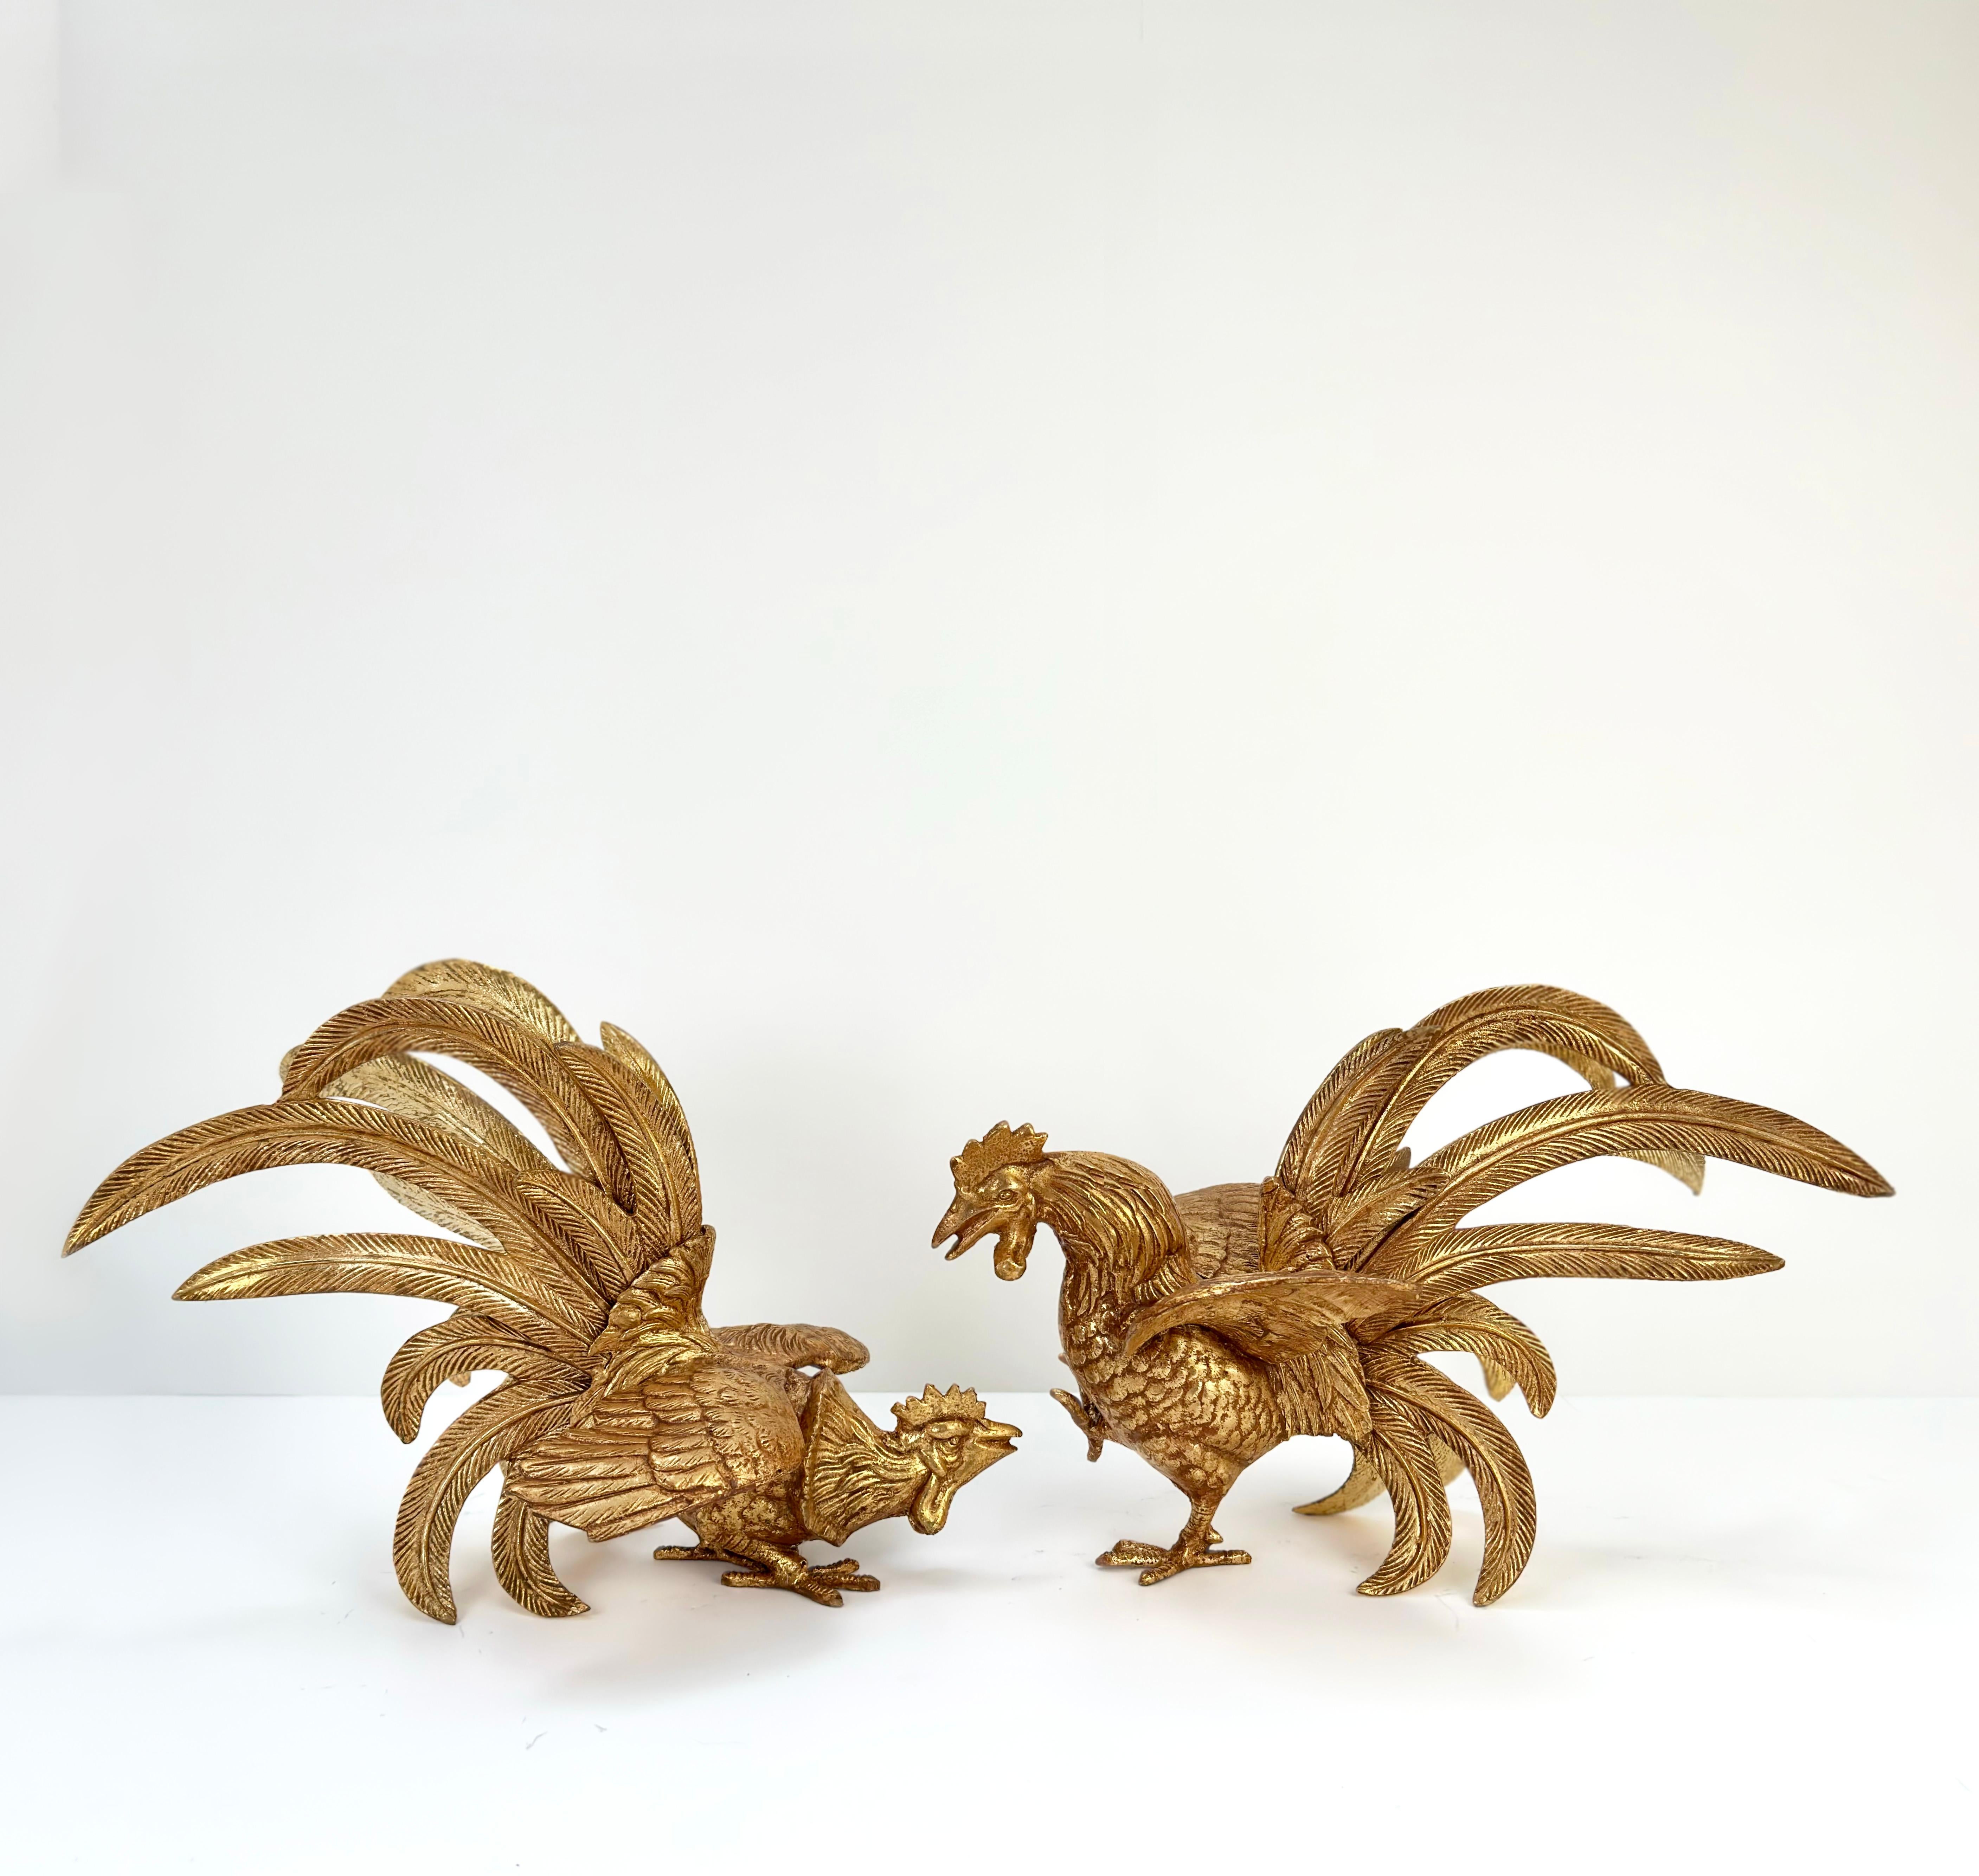 A pair of Mid-Century handmade gilded bronze Fighting Cockerel ornaments  from Japan

Decorate your space and add a sense of opulent drama with this pair of Japanese fighting cockerel ornaments.

Made in Japan around the mid-century, this pair of